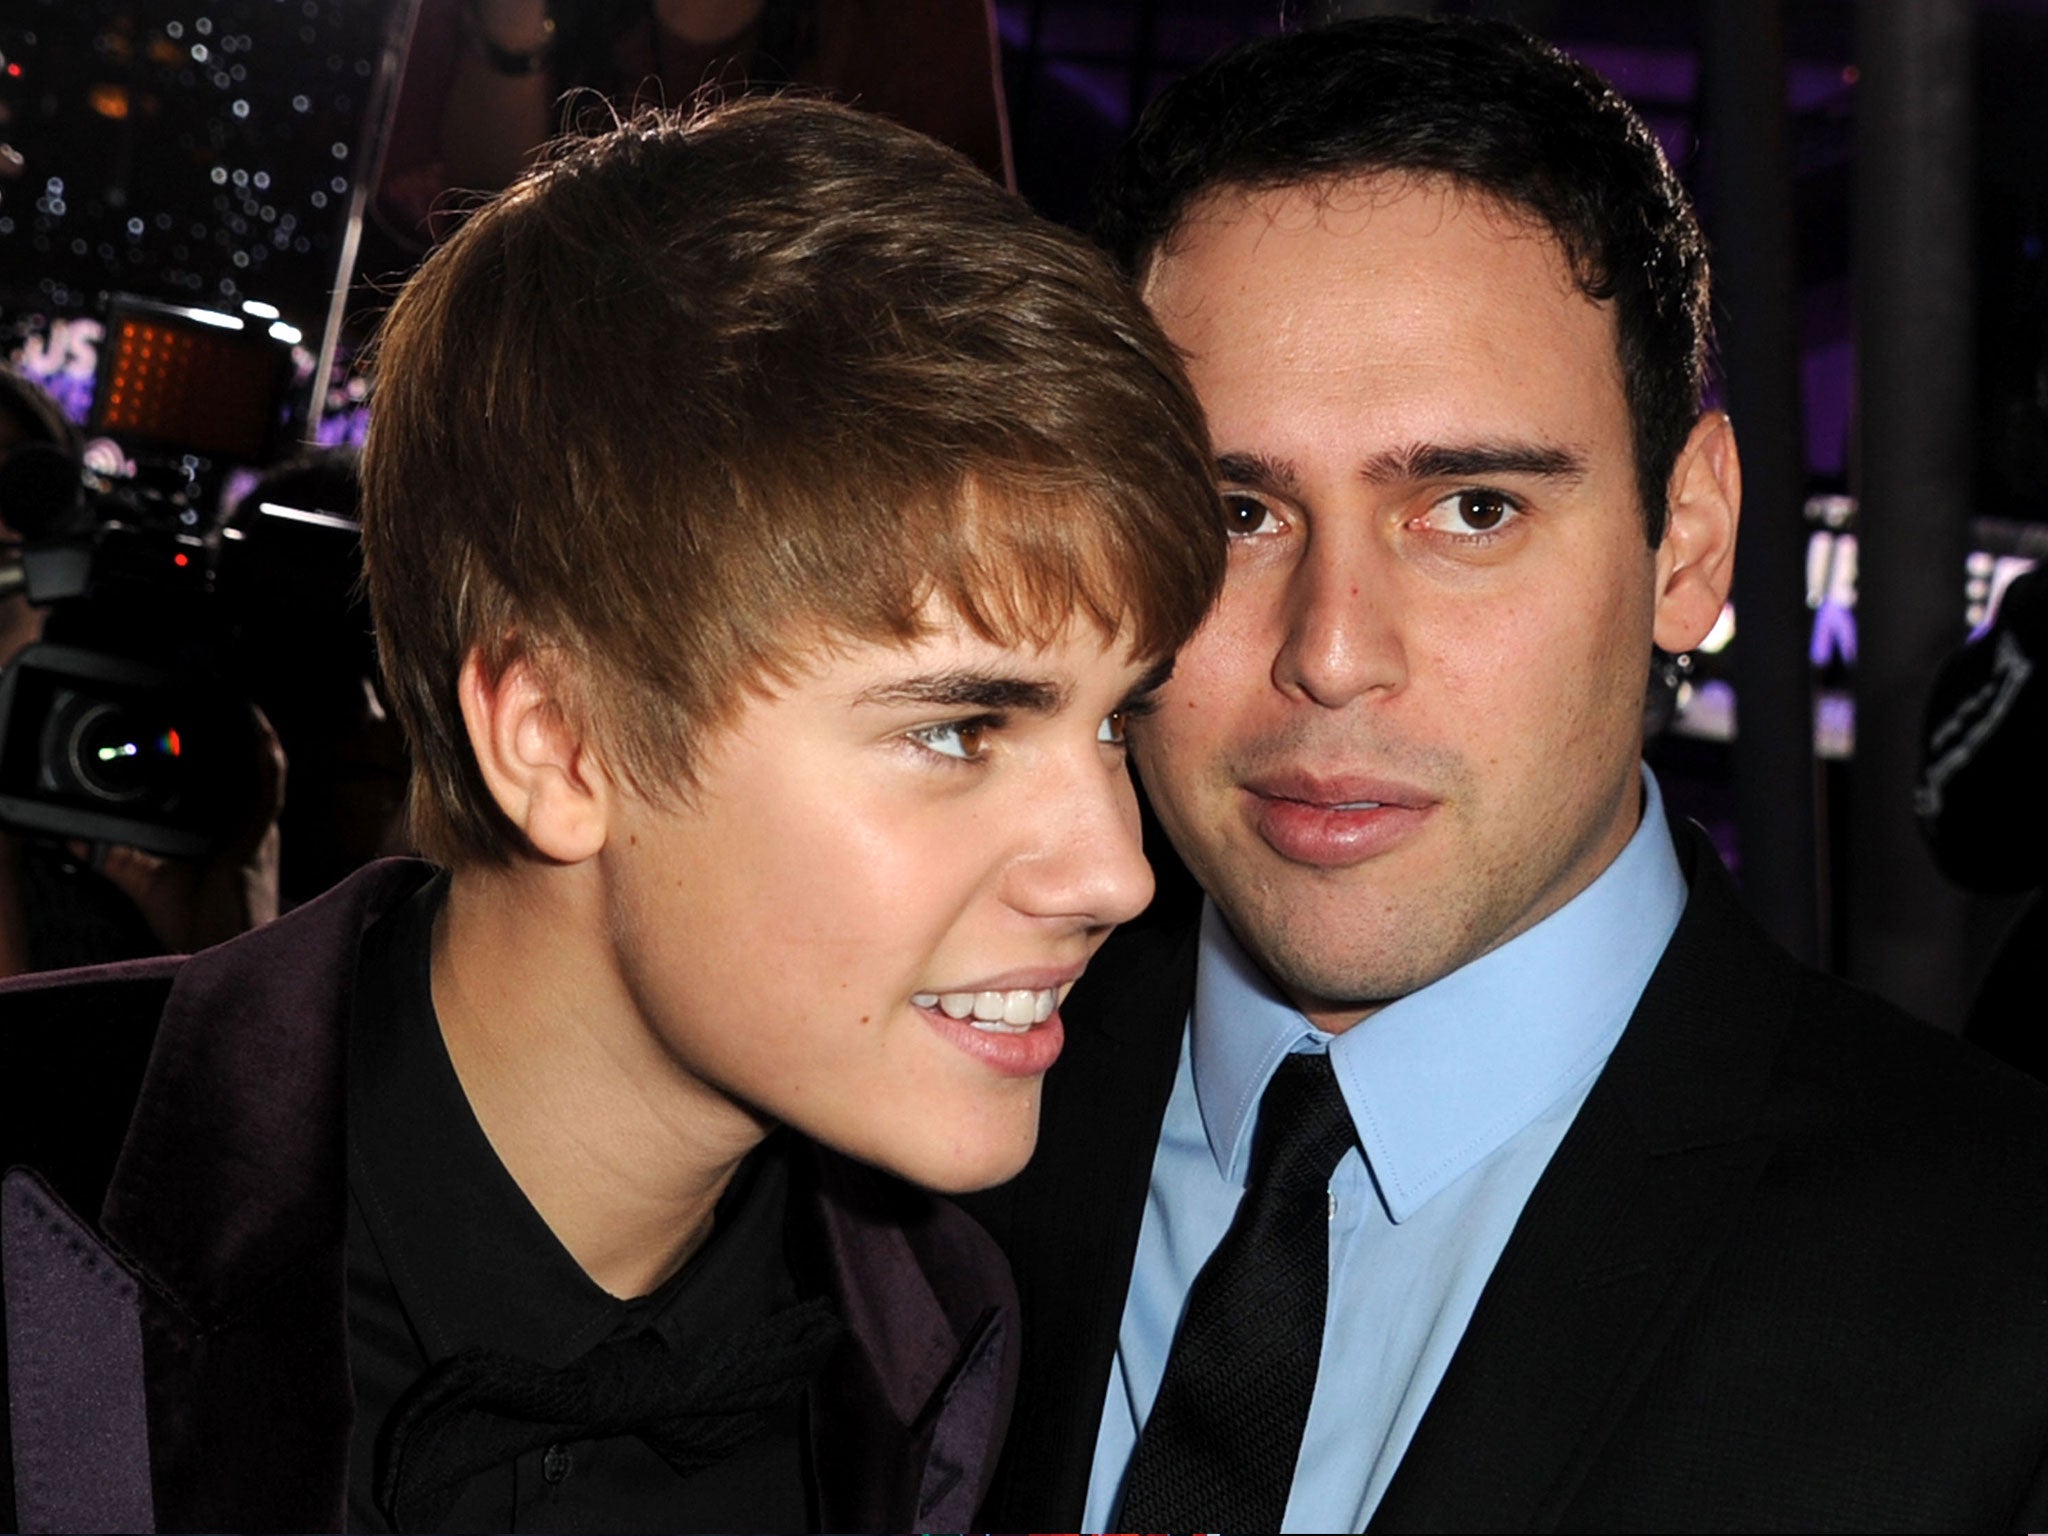 Singer Justin Bieber (L) and manager Scooter Braun arrive at the premiere of Paramount Pictures' 'Justin Bieber: Never Say Never' held at Nokia Theater L.A.